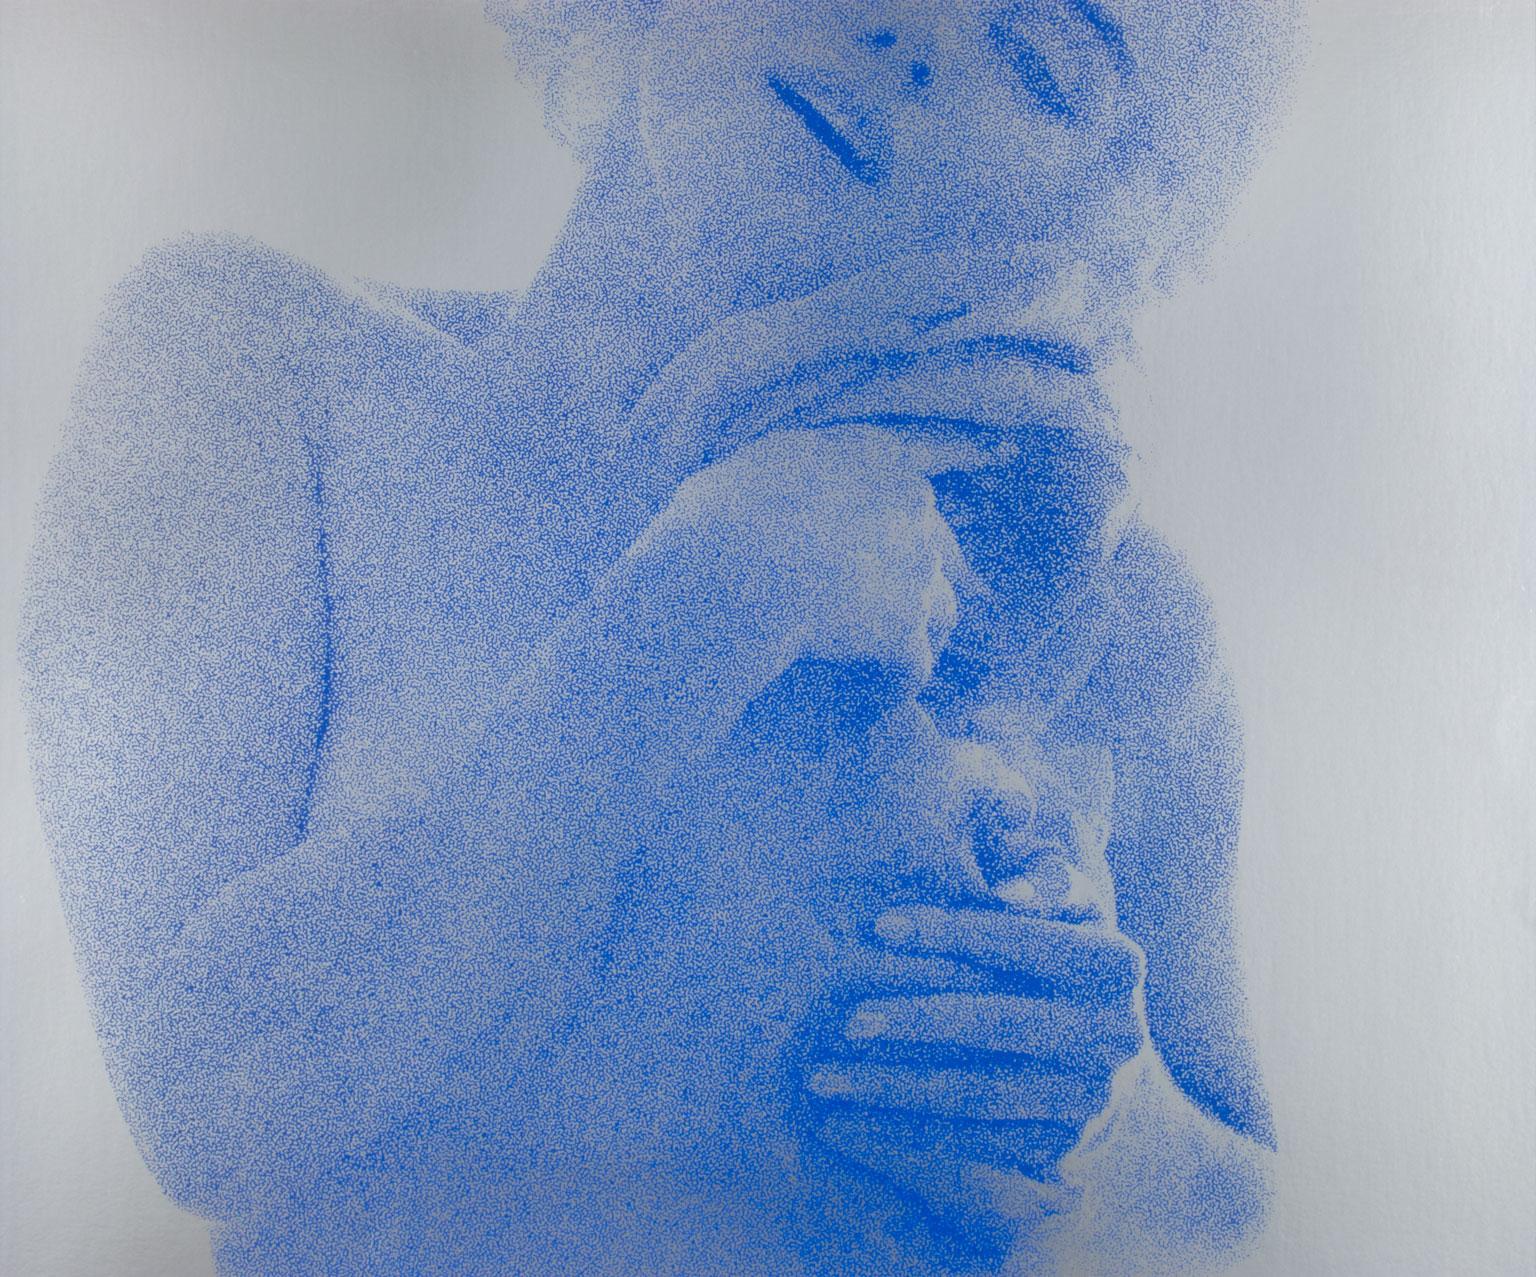 The Last Sitting: Marilyn w/ Scarf (Blue on Silver), an original silkscreen by Bert Stern, is a piece for the true collector. In Stern's 1982 book that chronicled The Last Sitting with Marilyn Monroe, Stern was described as 